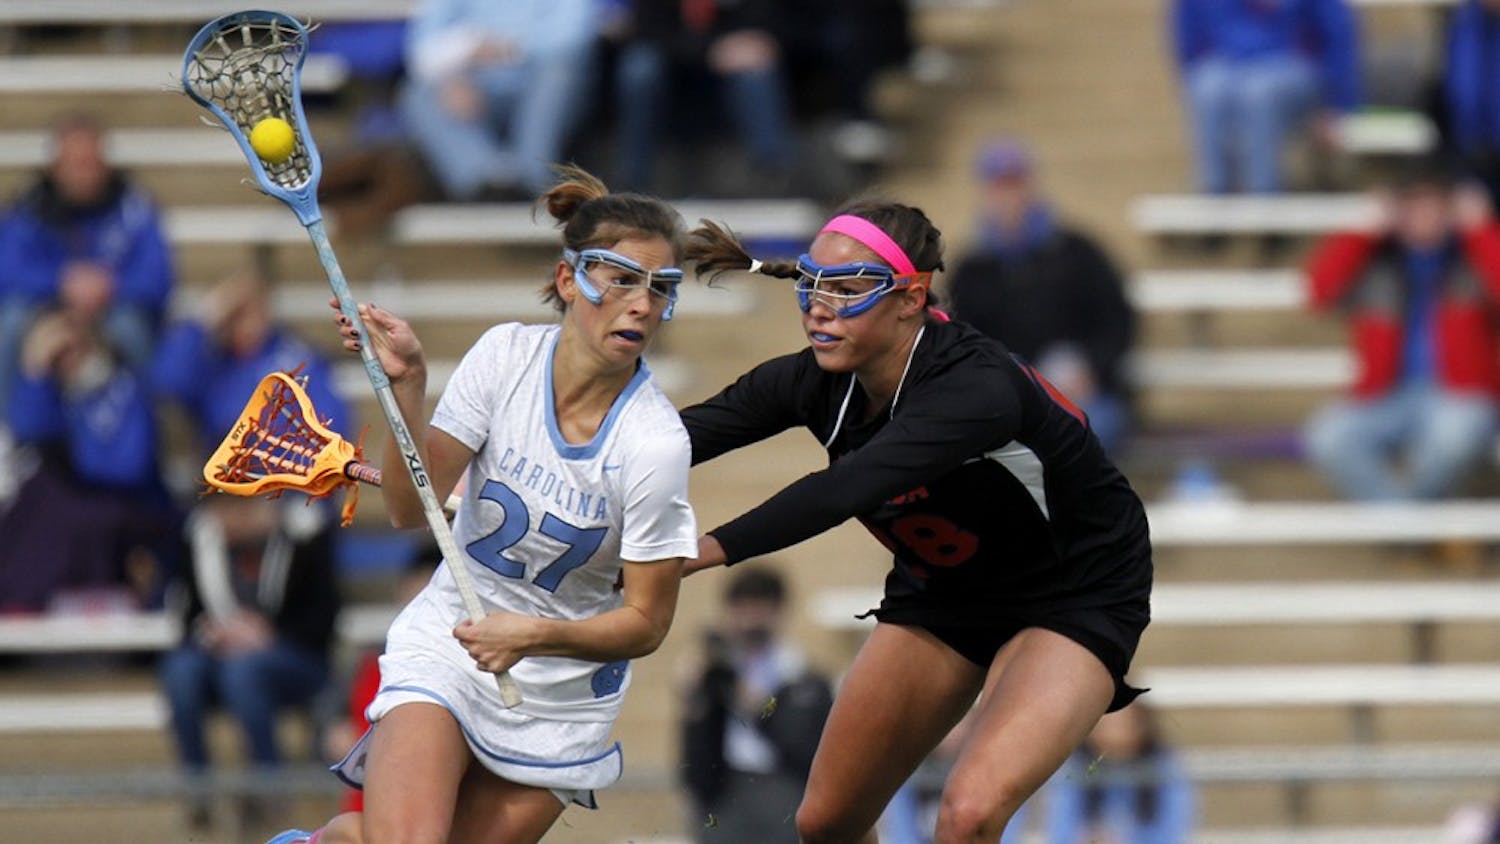 Aly Messinger (27) muscles her way past a Florida defender on Saturday at Fetzer Field. The Tar Heels won 20-8.